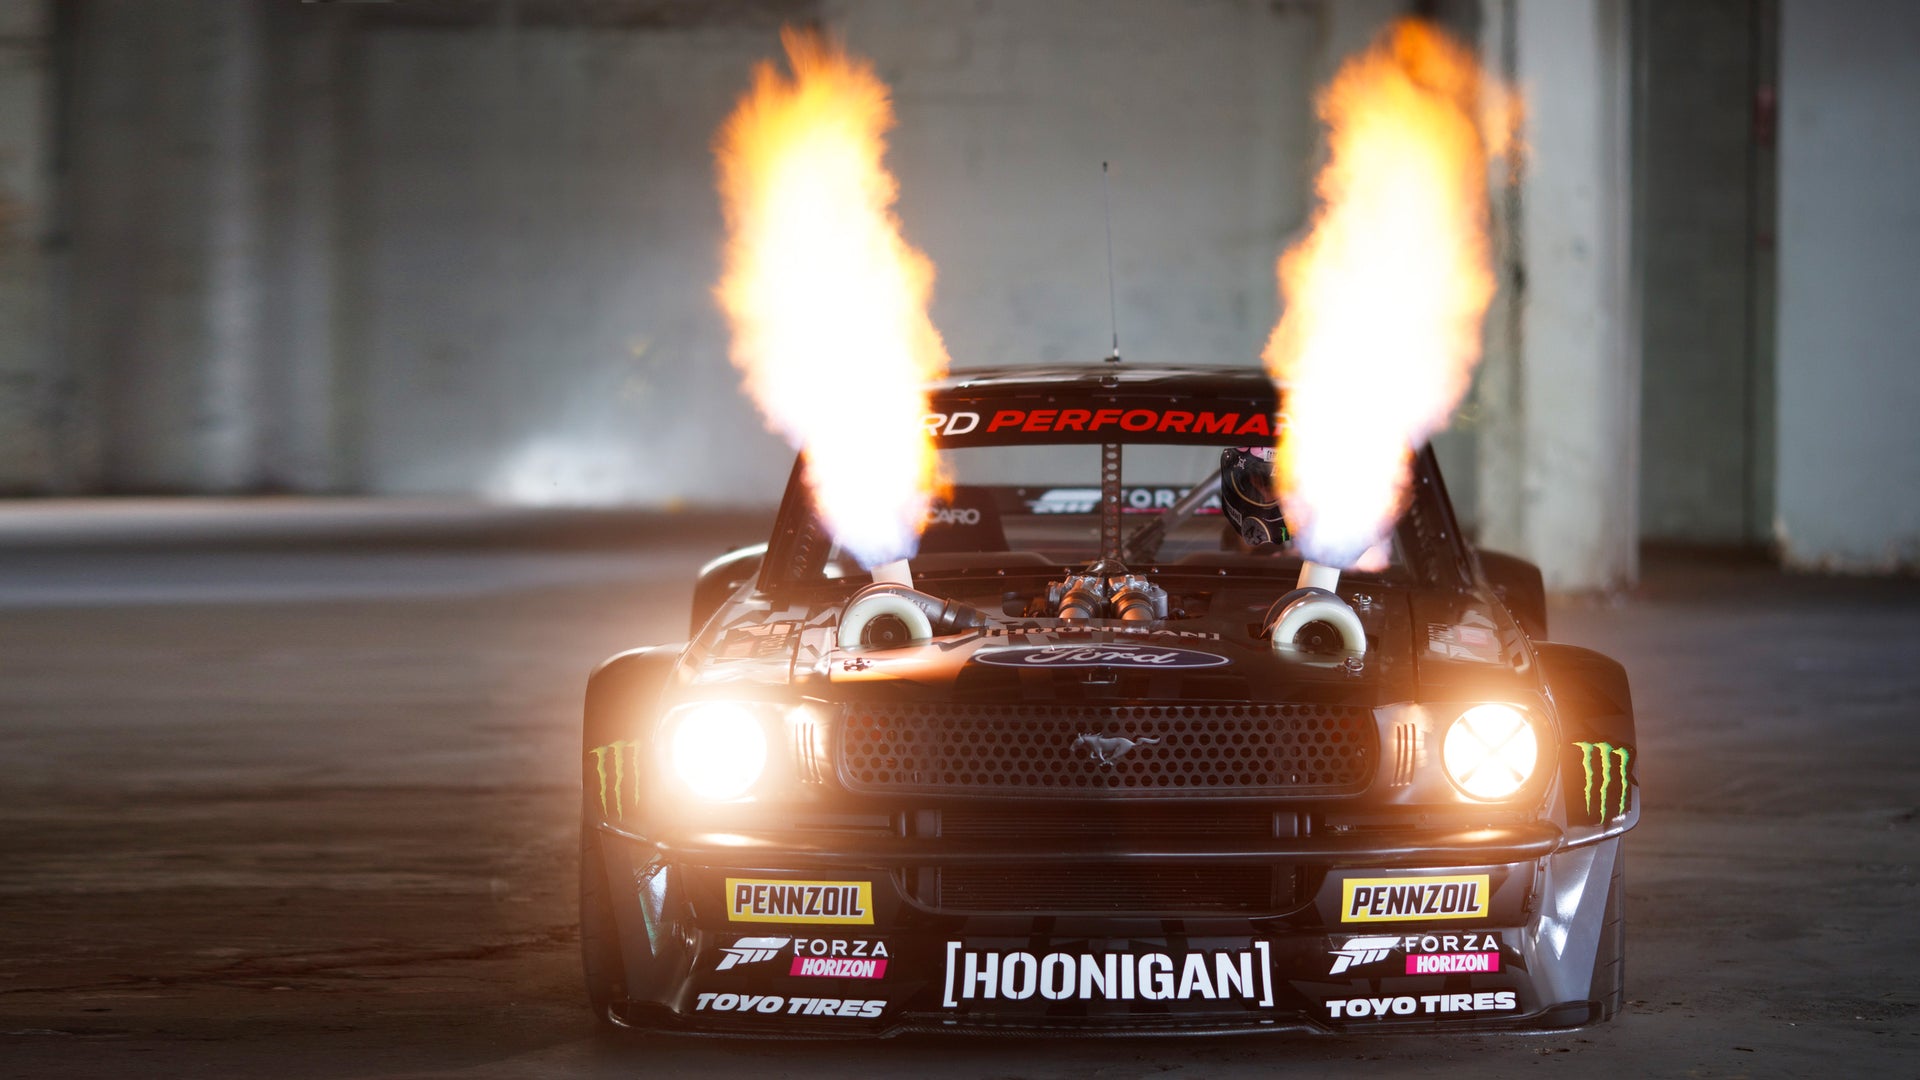 Hooni-Yule Log! Ken Block's 1,400hp Twin Turbo AWD Ford Mustang Hoonicorn Spits Fire For 2 Hours